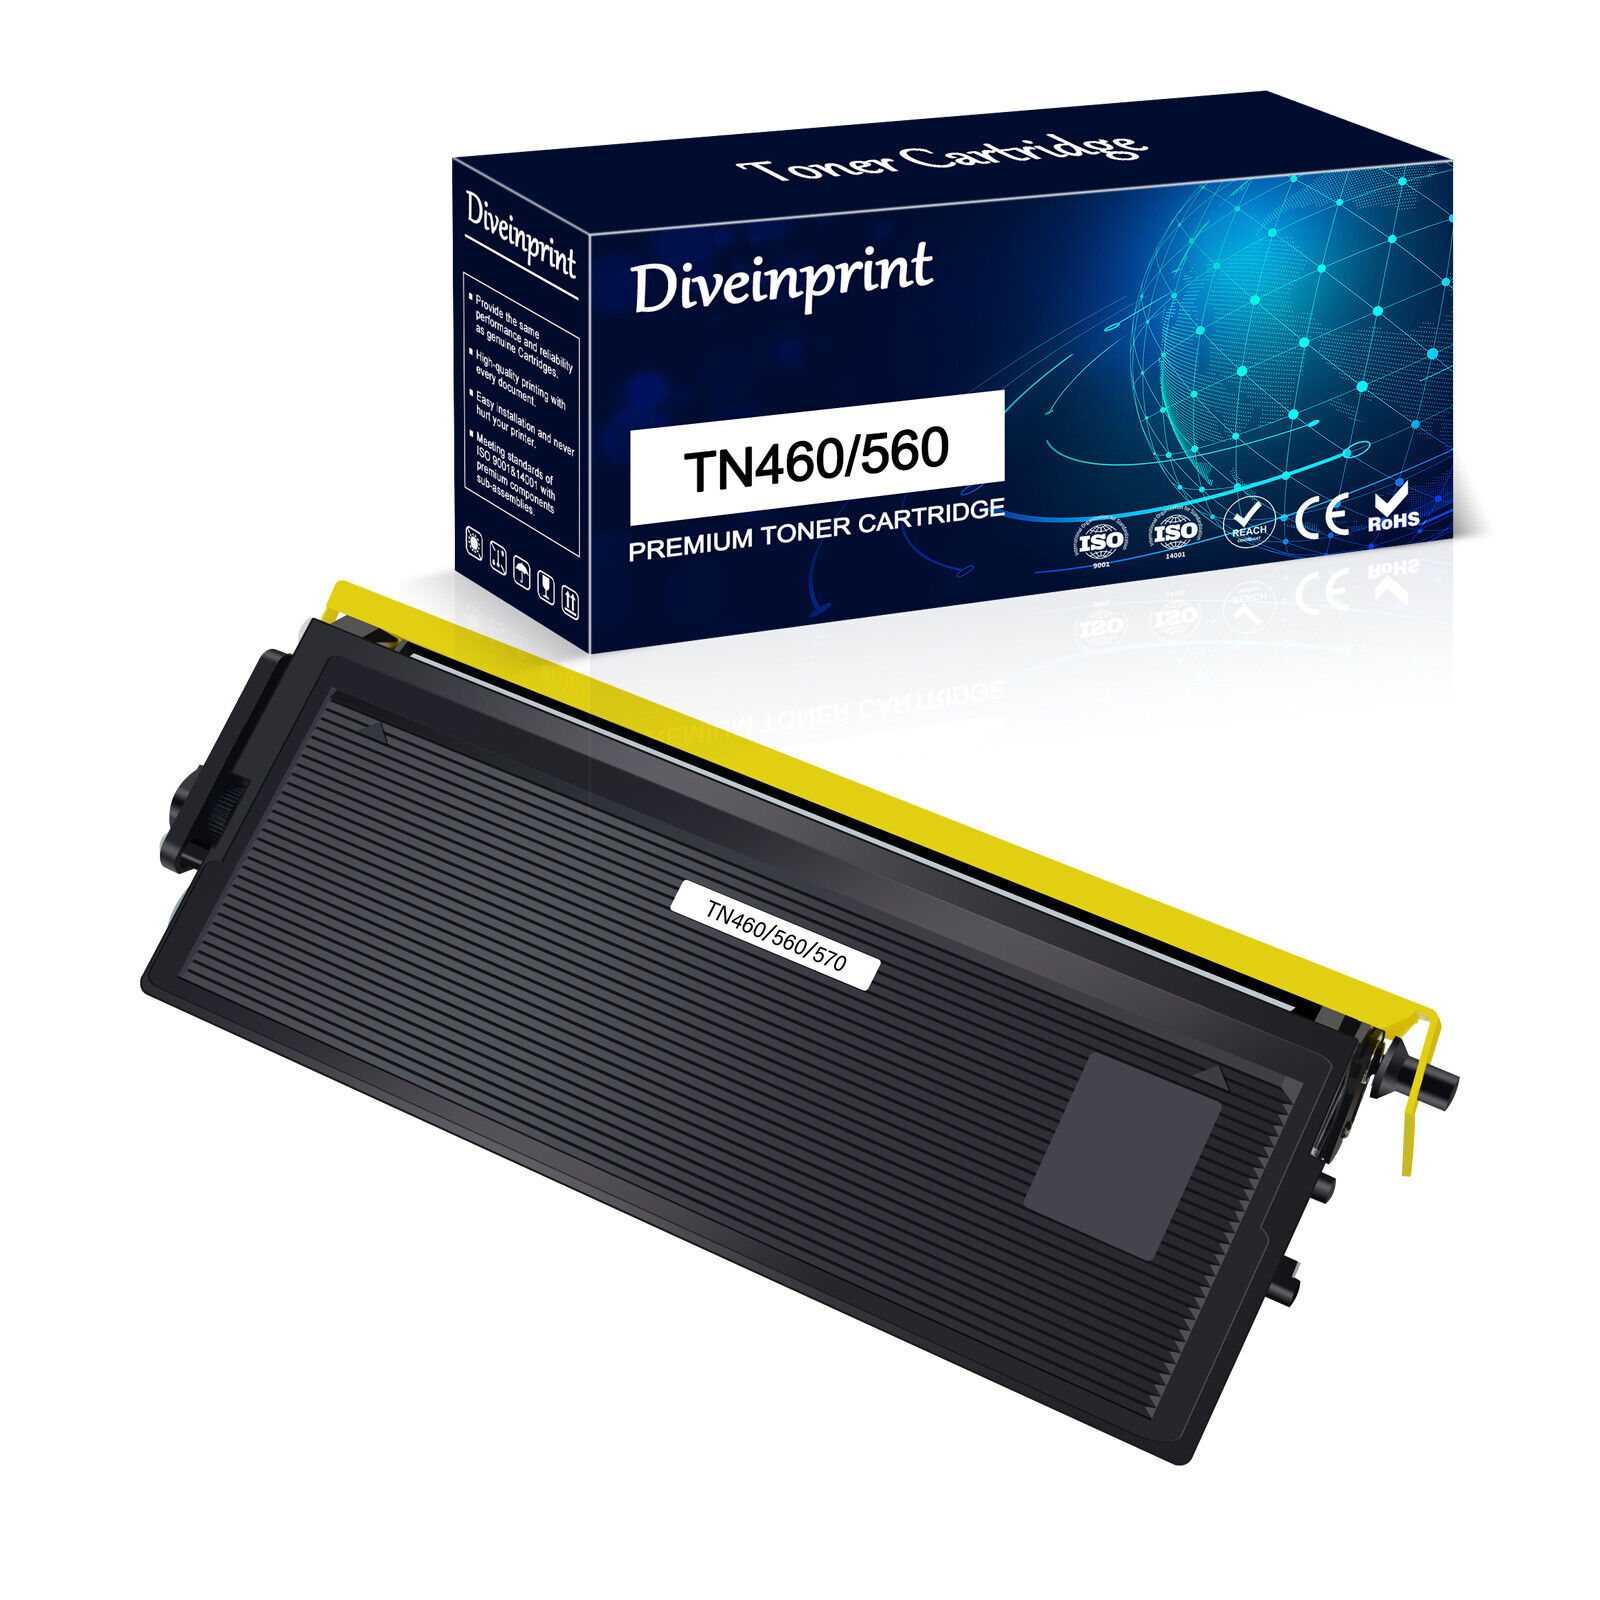 TN460 Toner Cartridge for Brother TN-460 MFC-9600 MFC-9650 MFC-9660 MFC-9700 